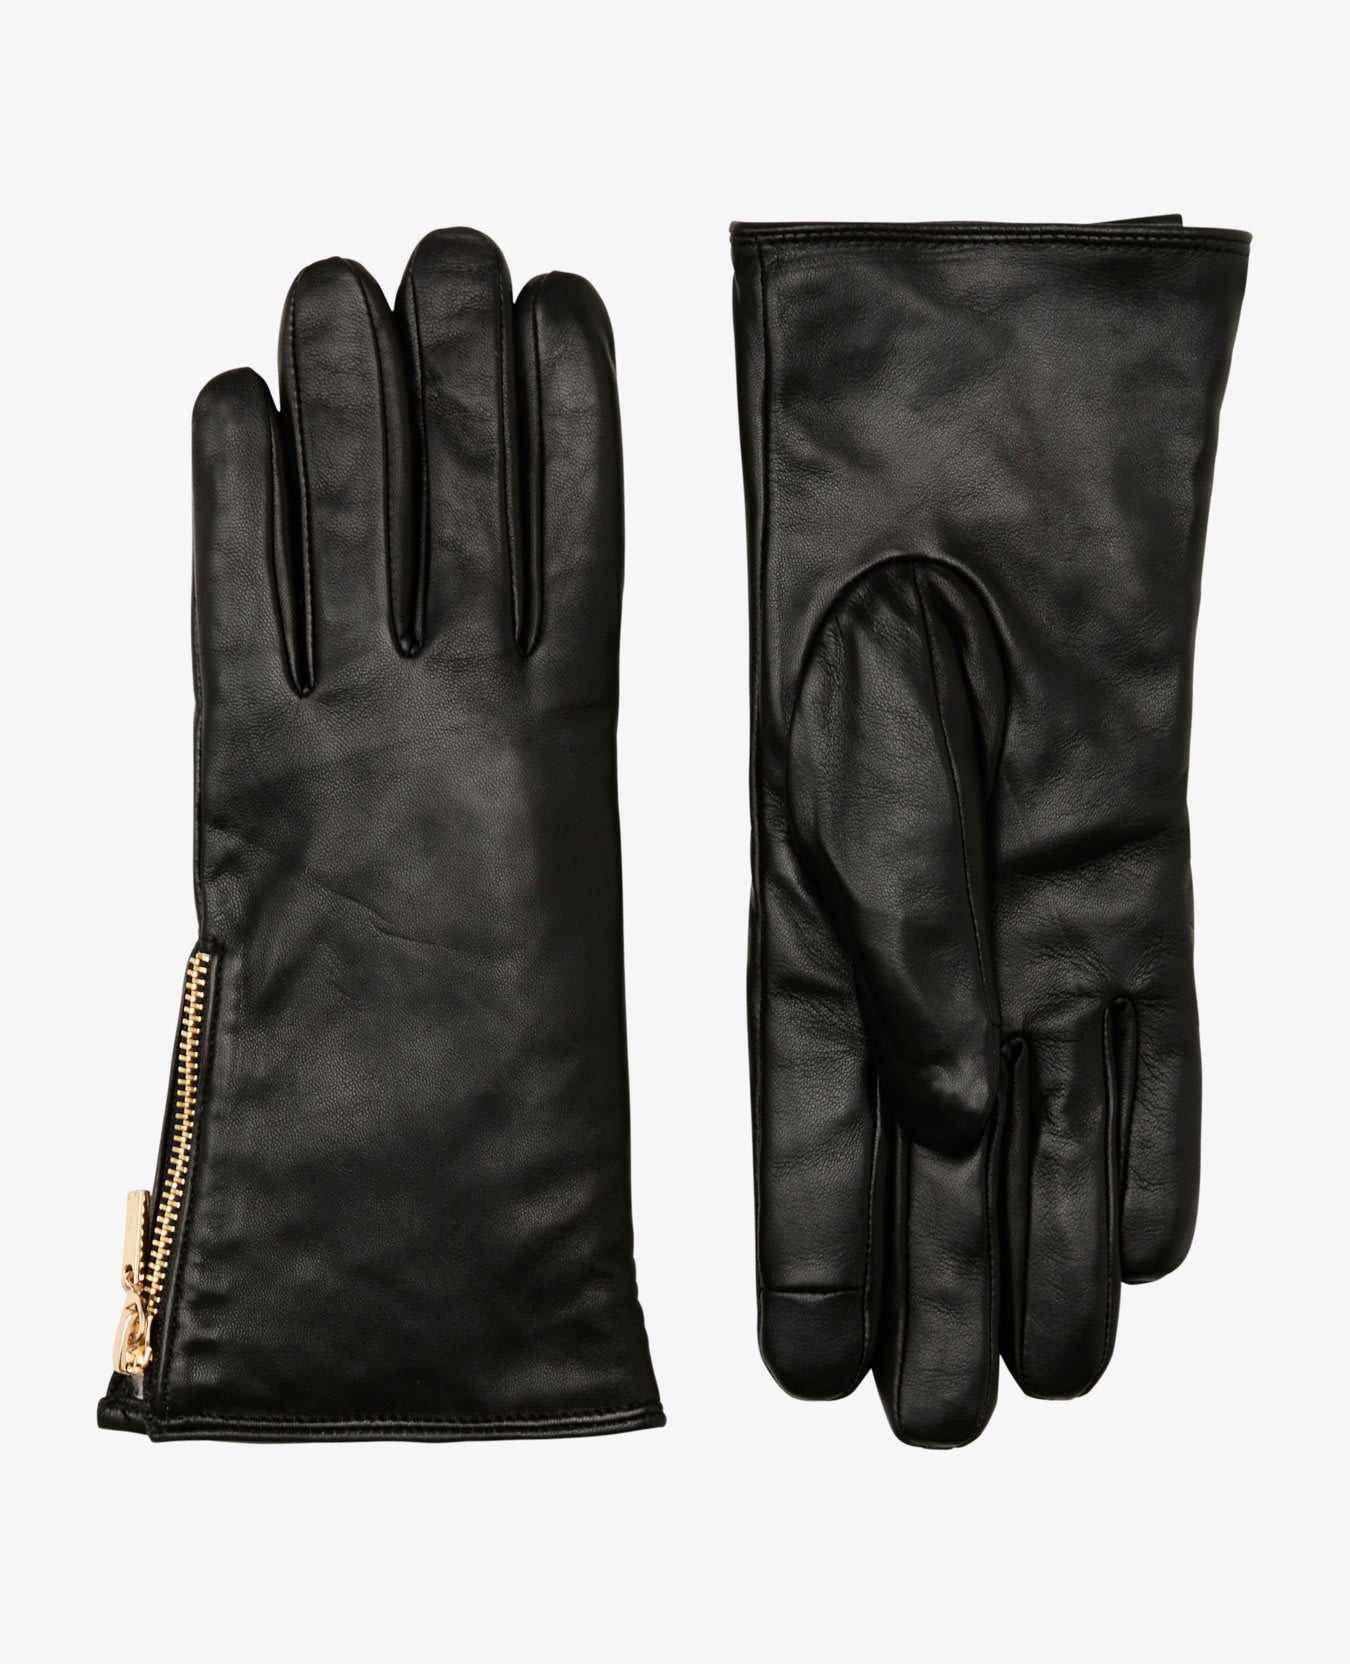 TAIAUM LEATHER GLOVES